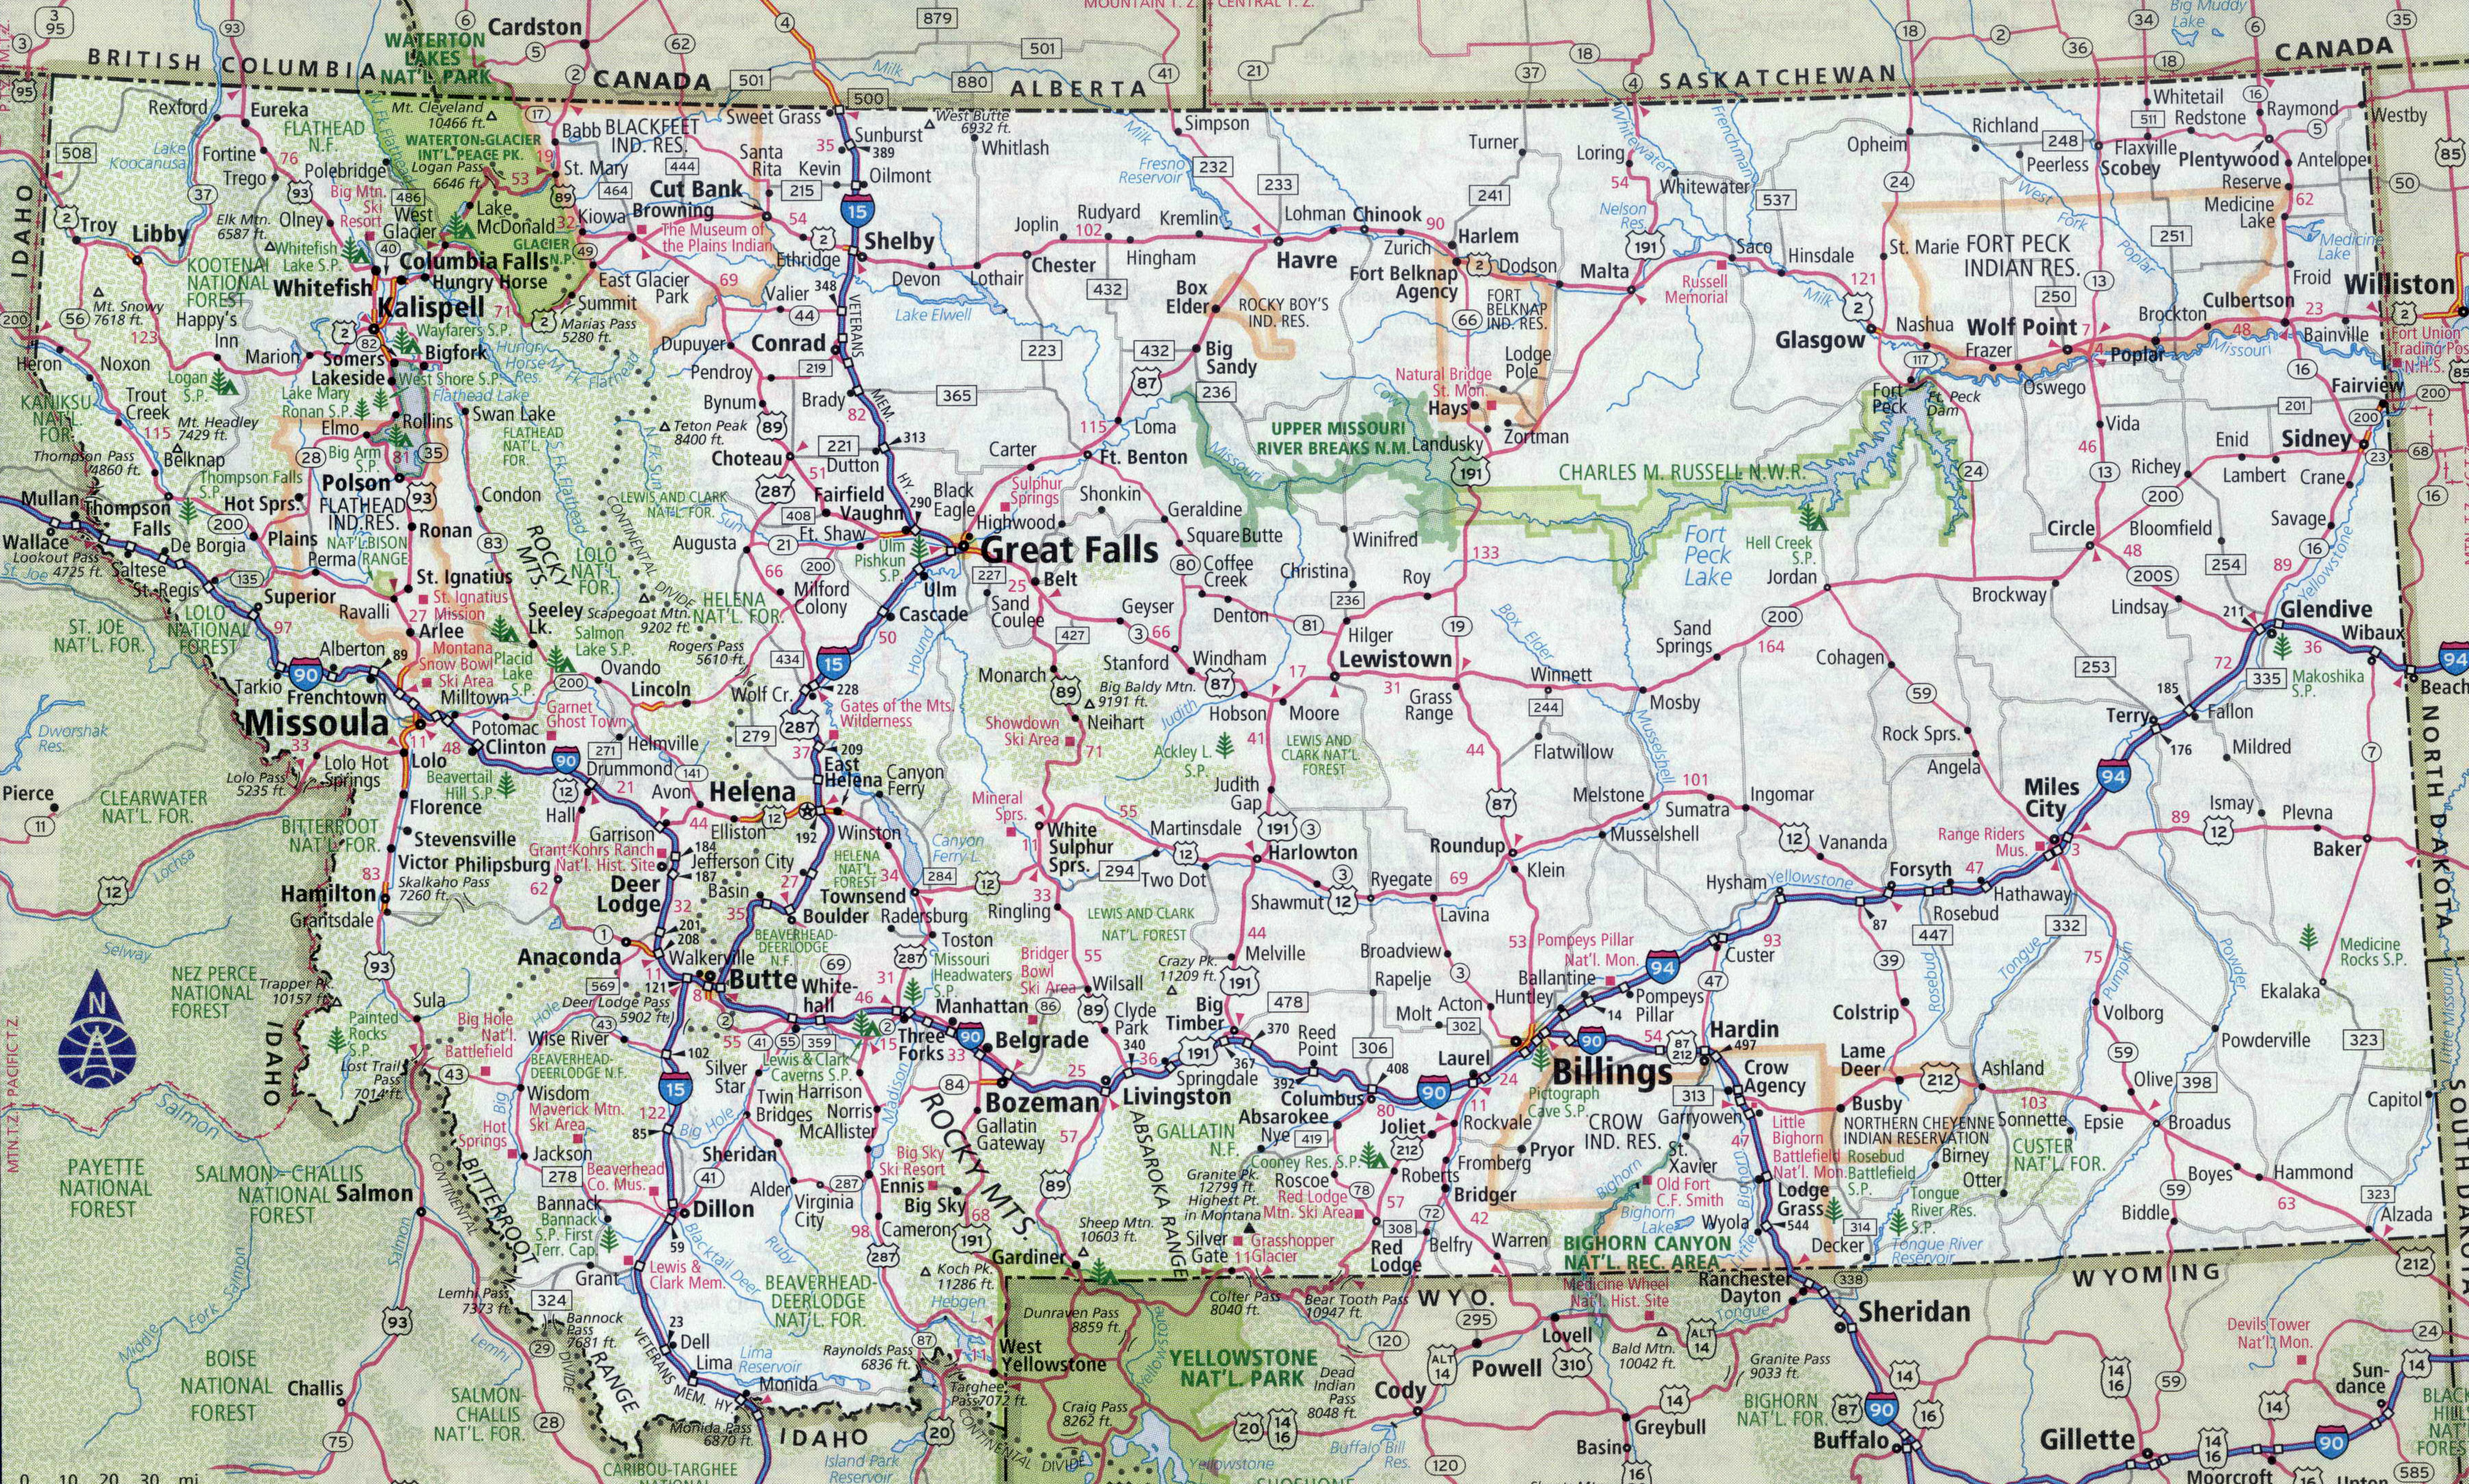 montana travel guide and map